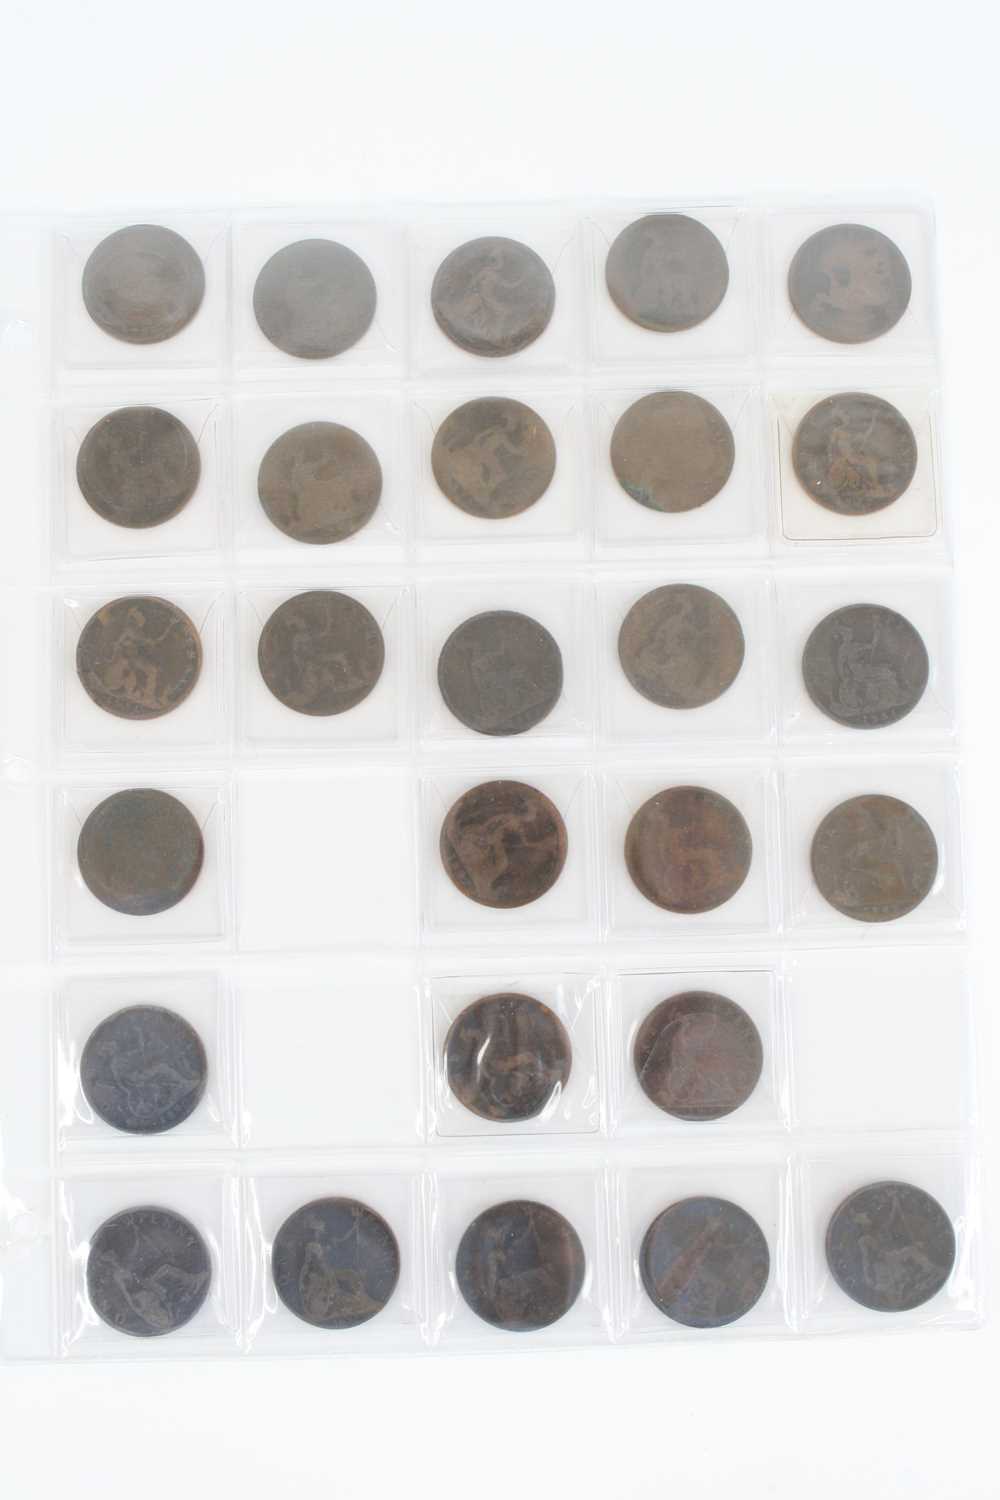 Great Britain, an album of coins mainly Victorian and later copper pennies, together with various